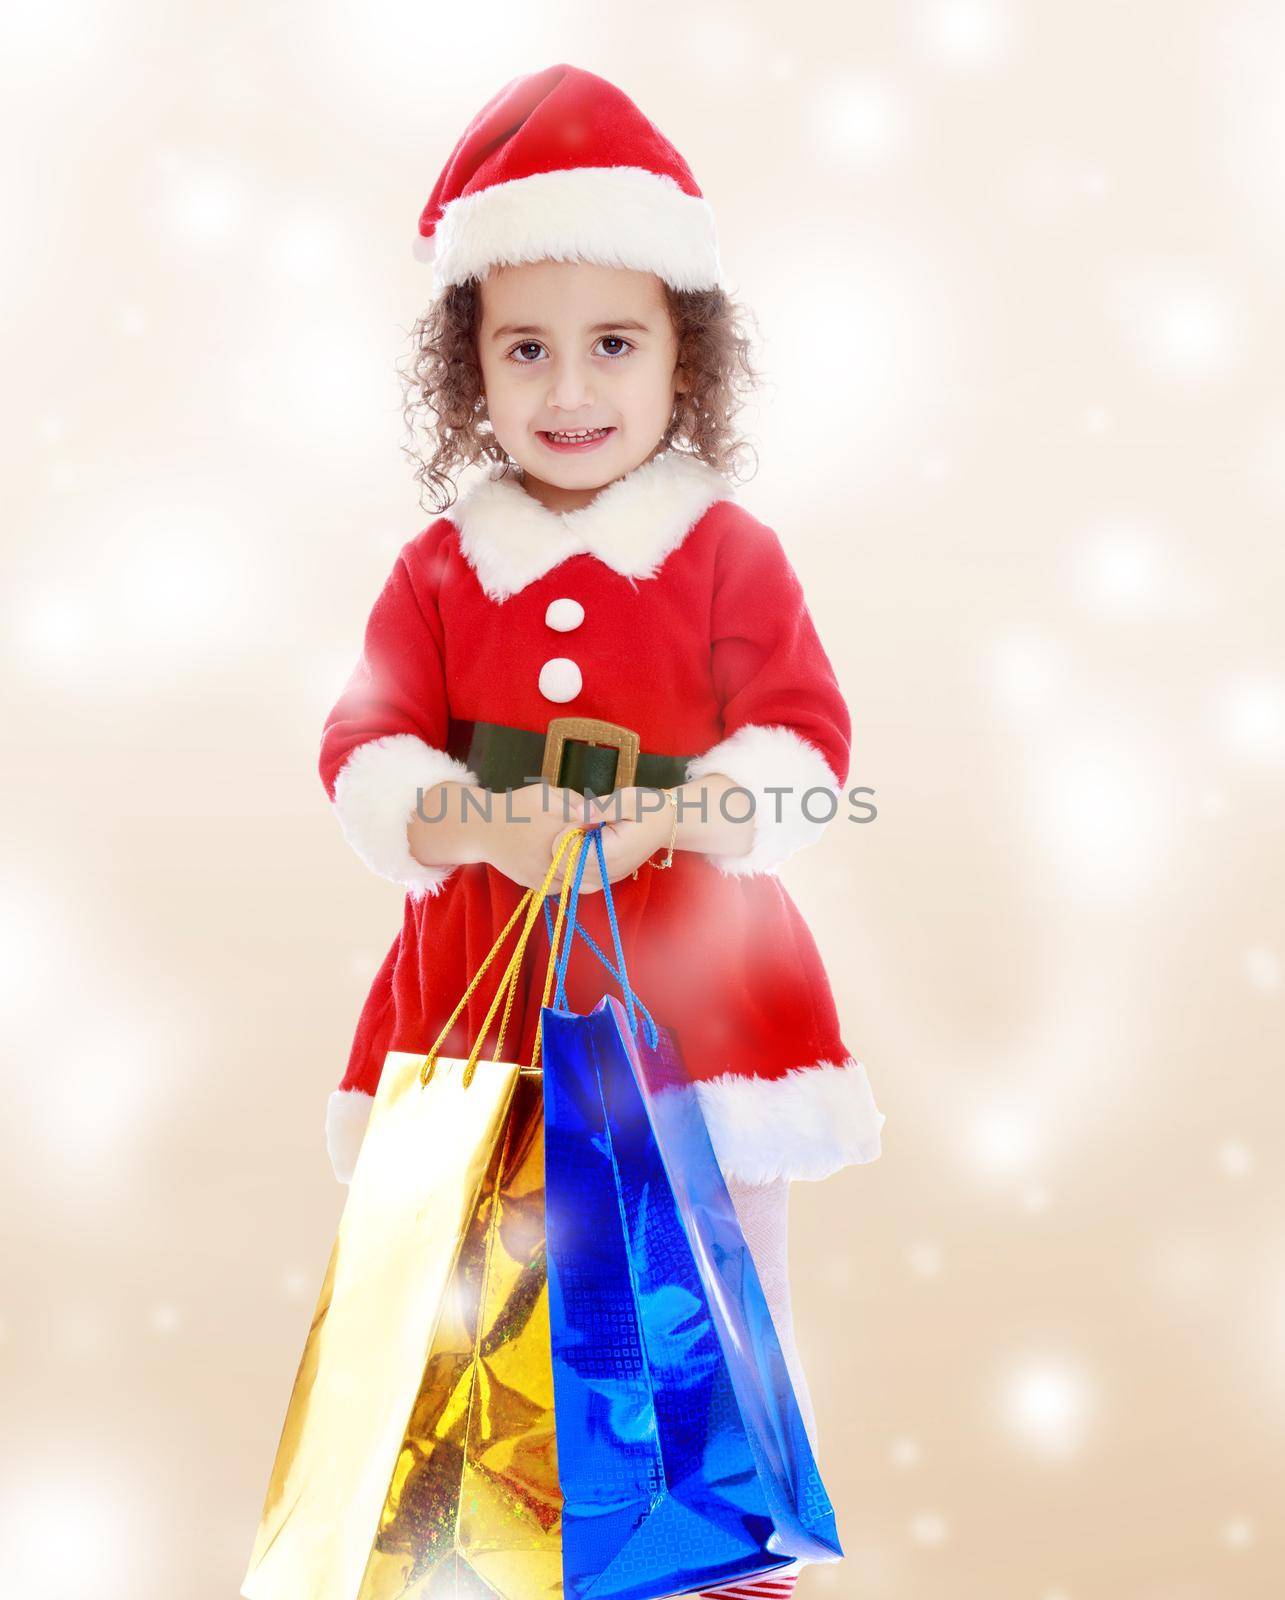 Gentle little curly-haired girl in a coat and hat of Santa Claus holding colorful shopping bags. Close-up.Winter brown abstract background with white snowflakes.